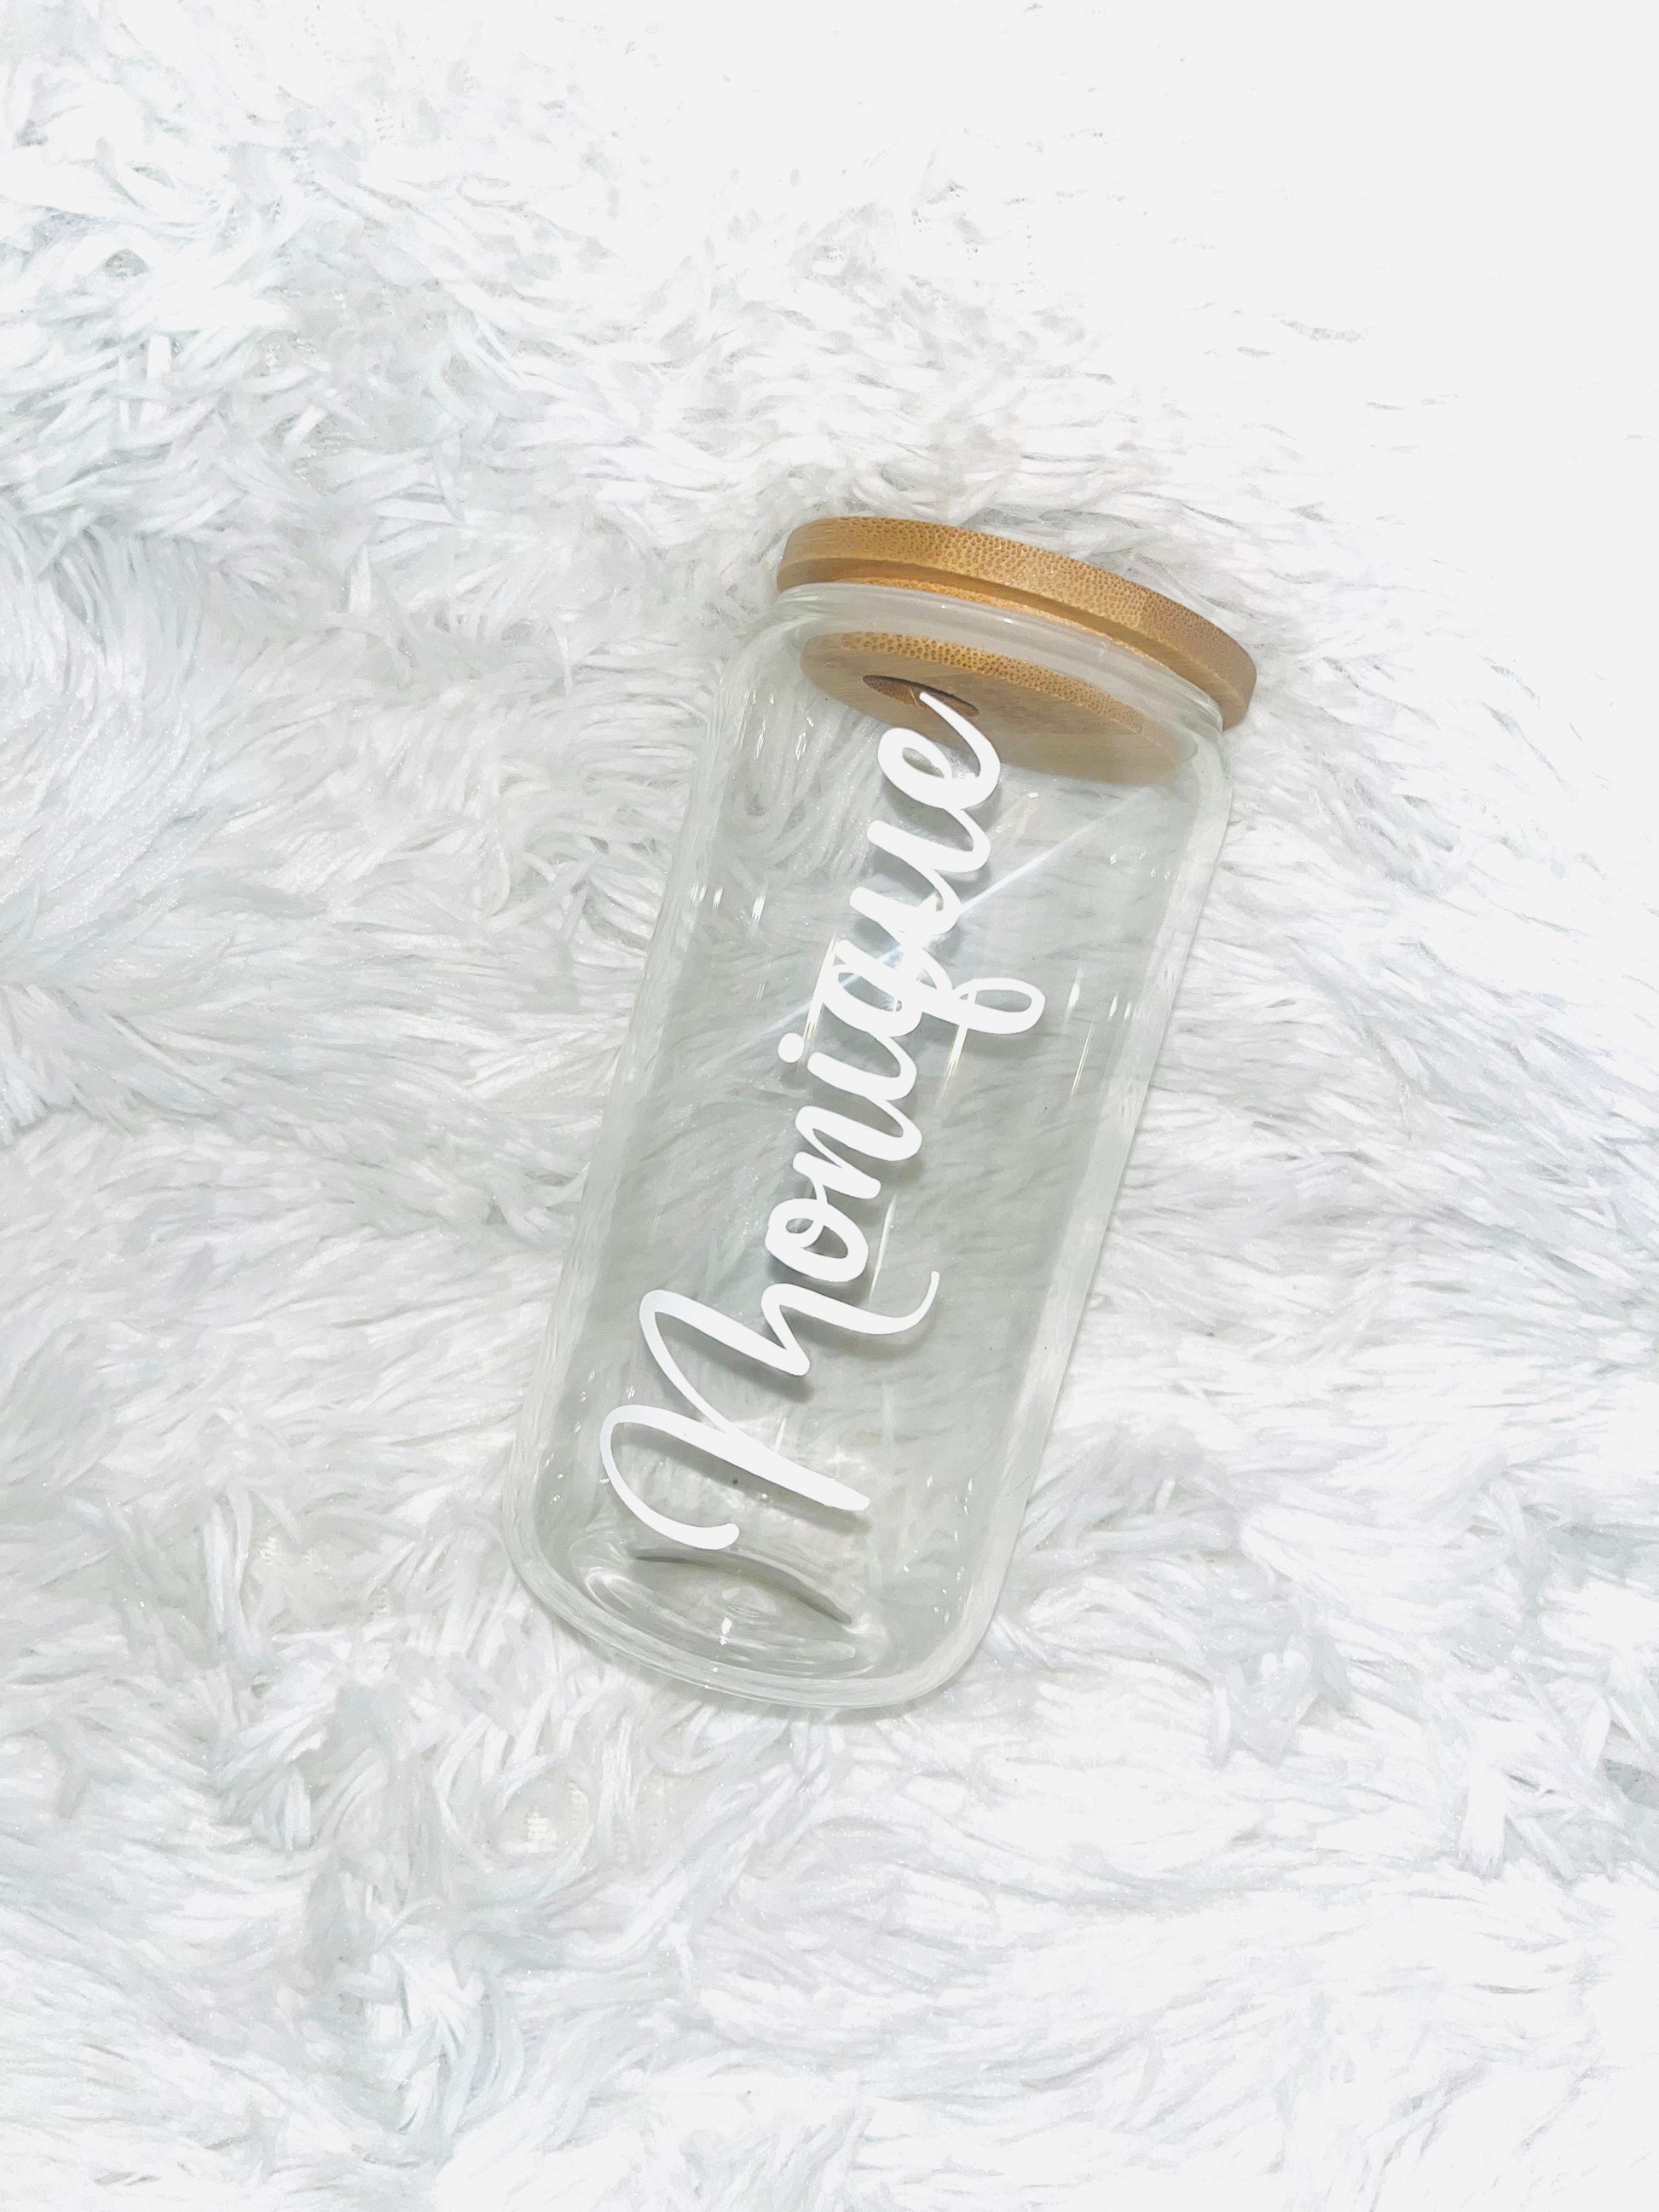 Personalized Glass Can Tumbler Beer Mug Glass Personalize It By Belle 